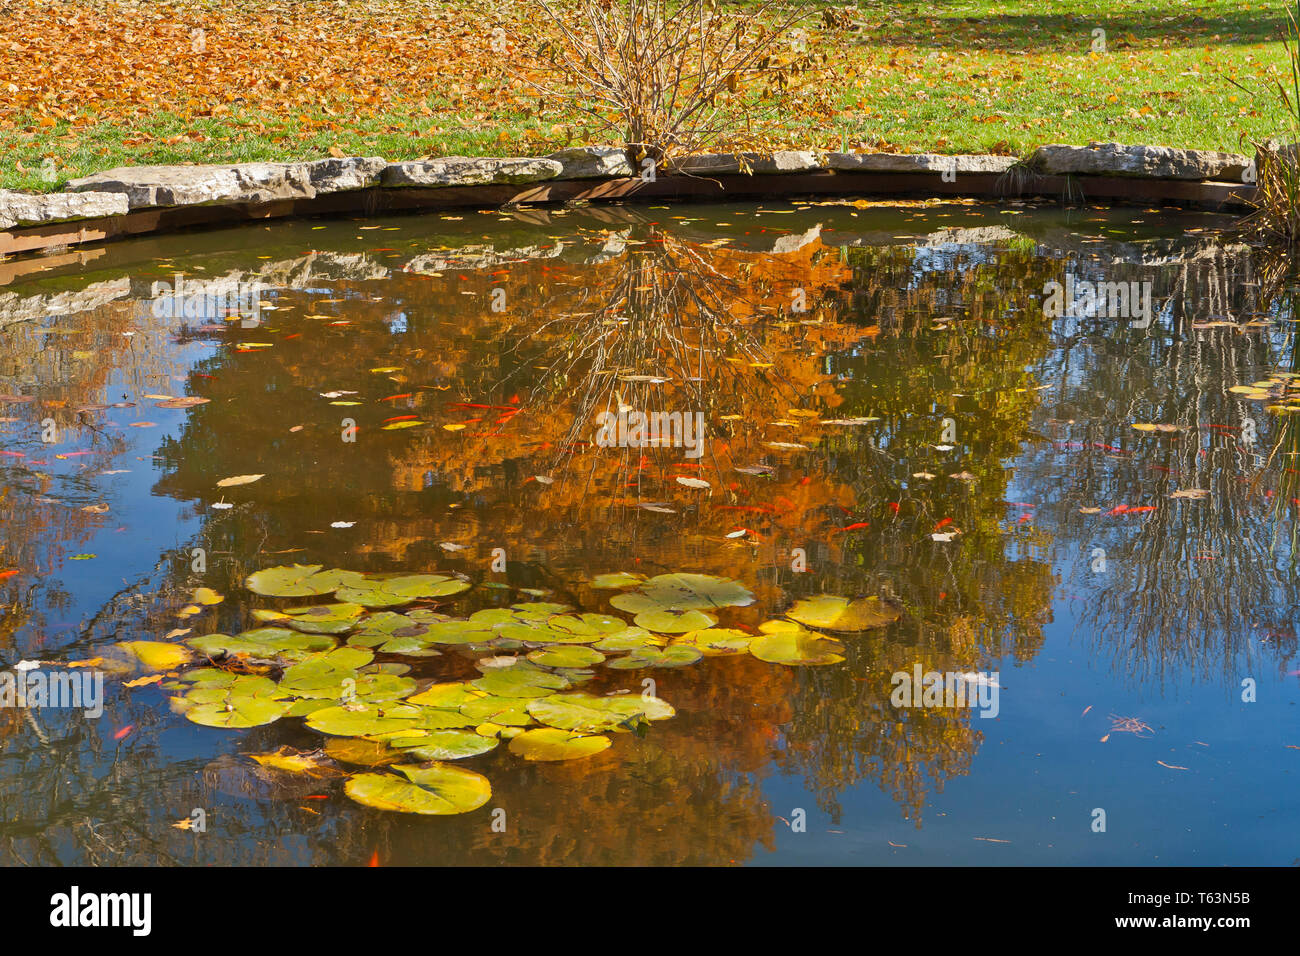 Bright red goldfish in a small pond at the Missouri Botanical Garden with water lily pads and the reddish-brown autumn foliage of a bald cypress refle Stock Photo